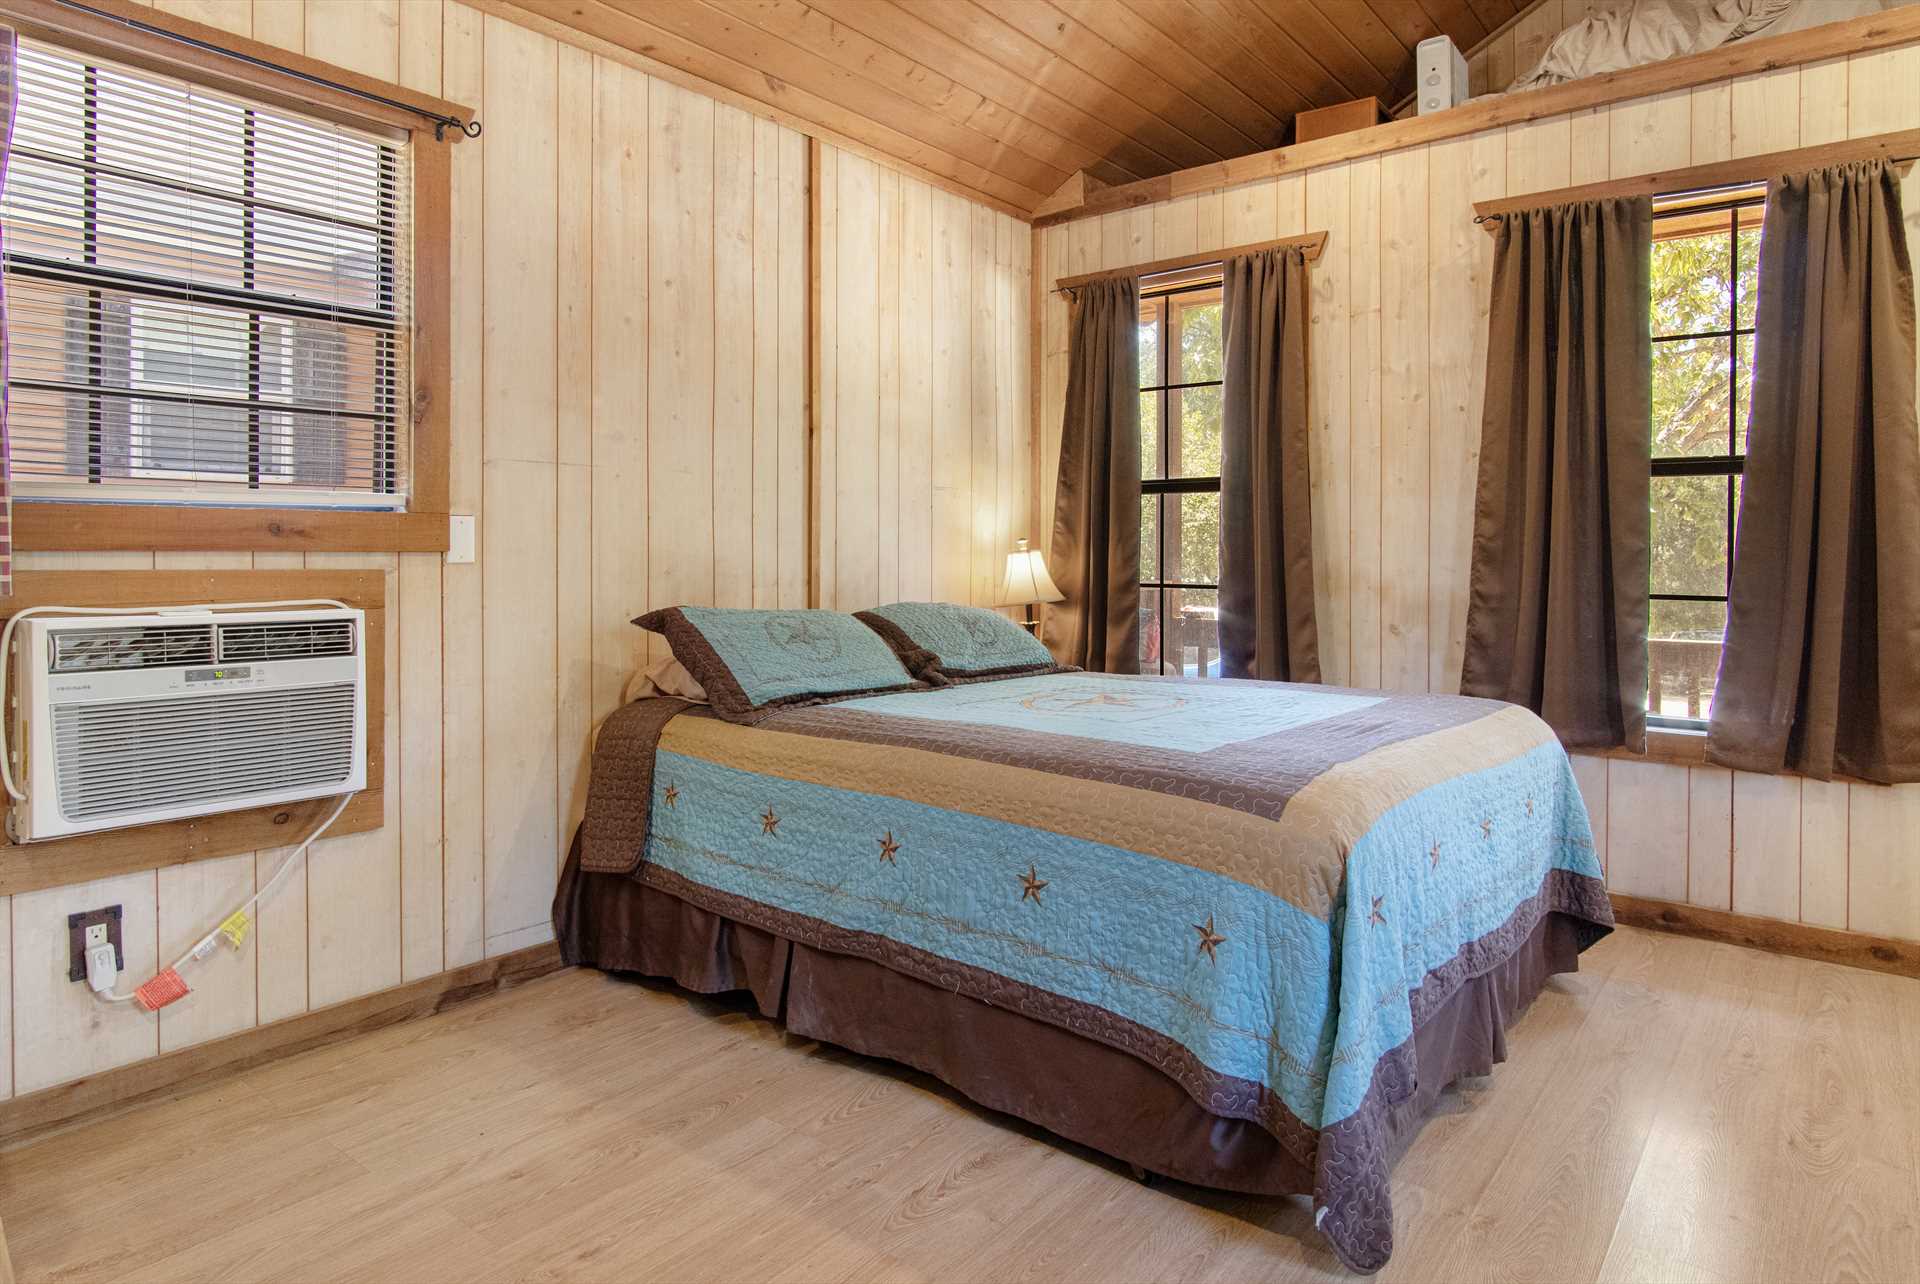                                                 With luxurious sleeping space for up to four, the cabin serves equally well as a family getaway, or as a couples' retreat.